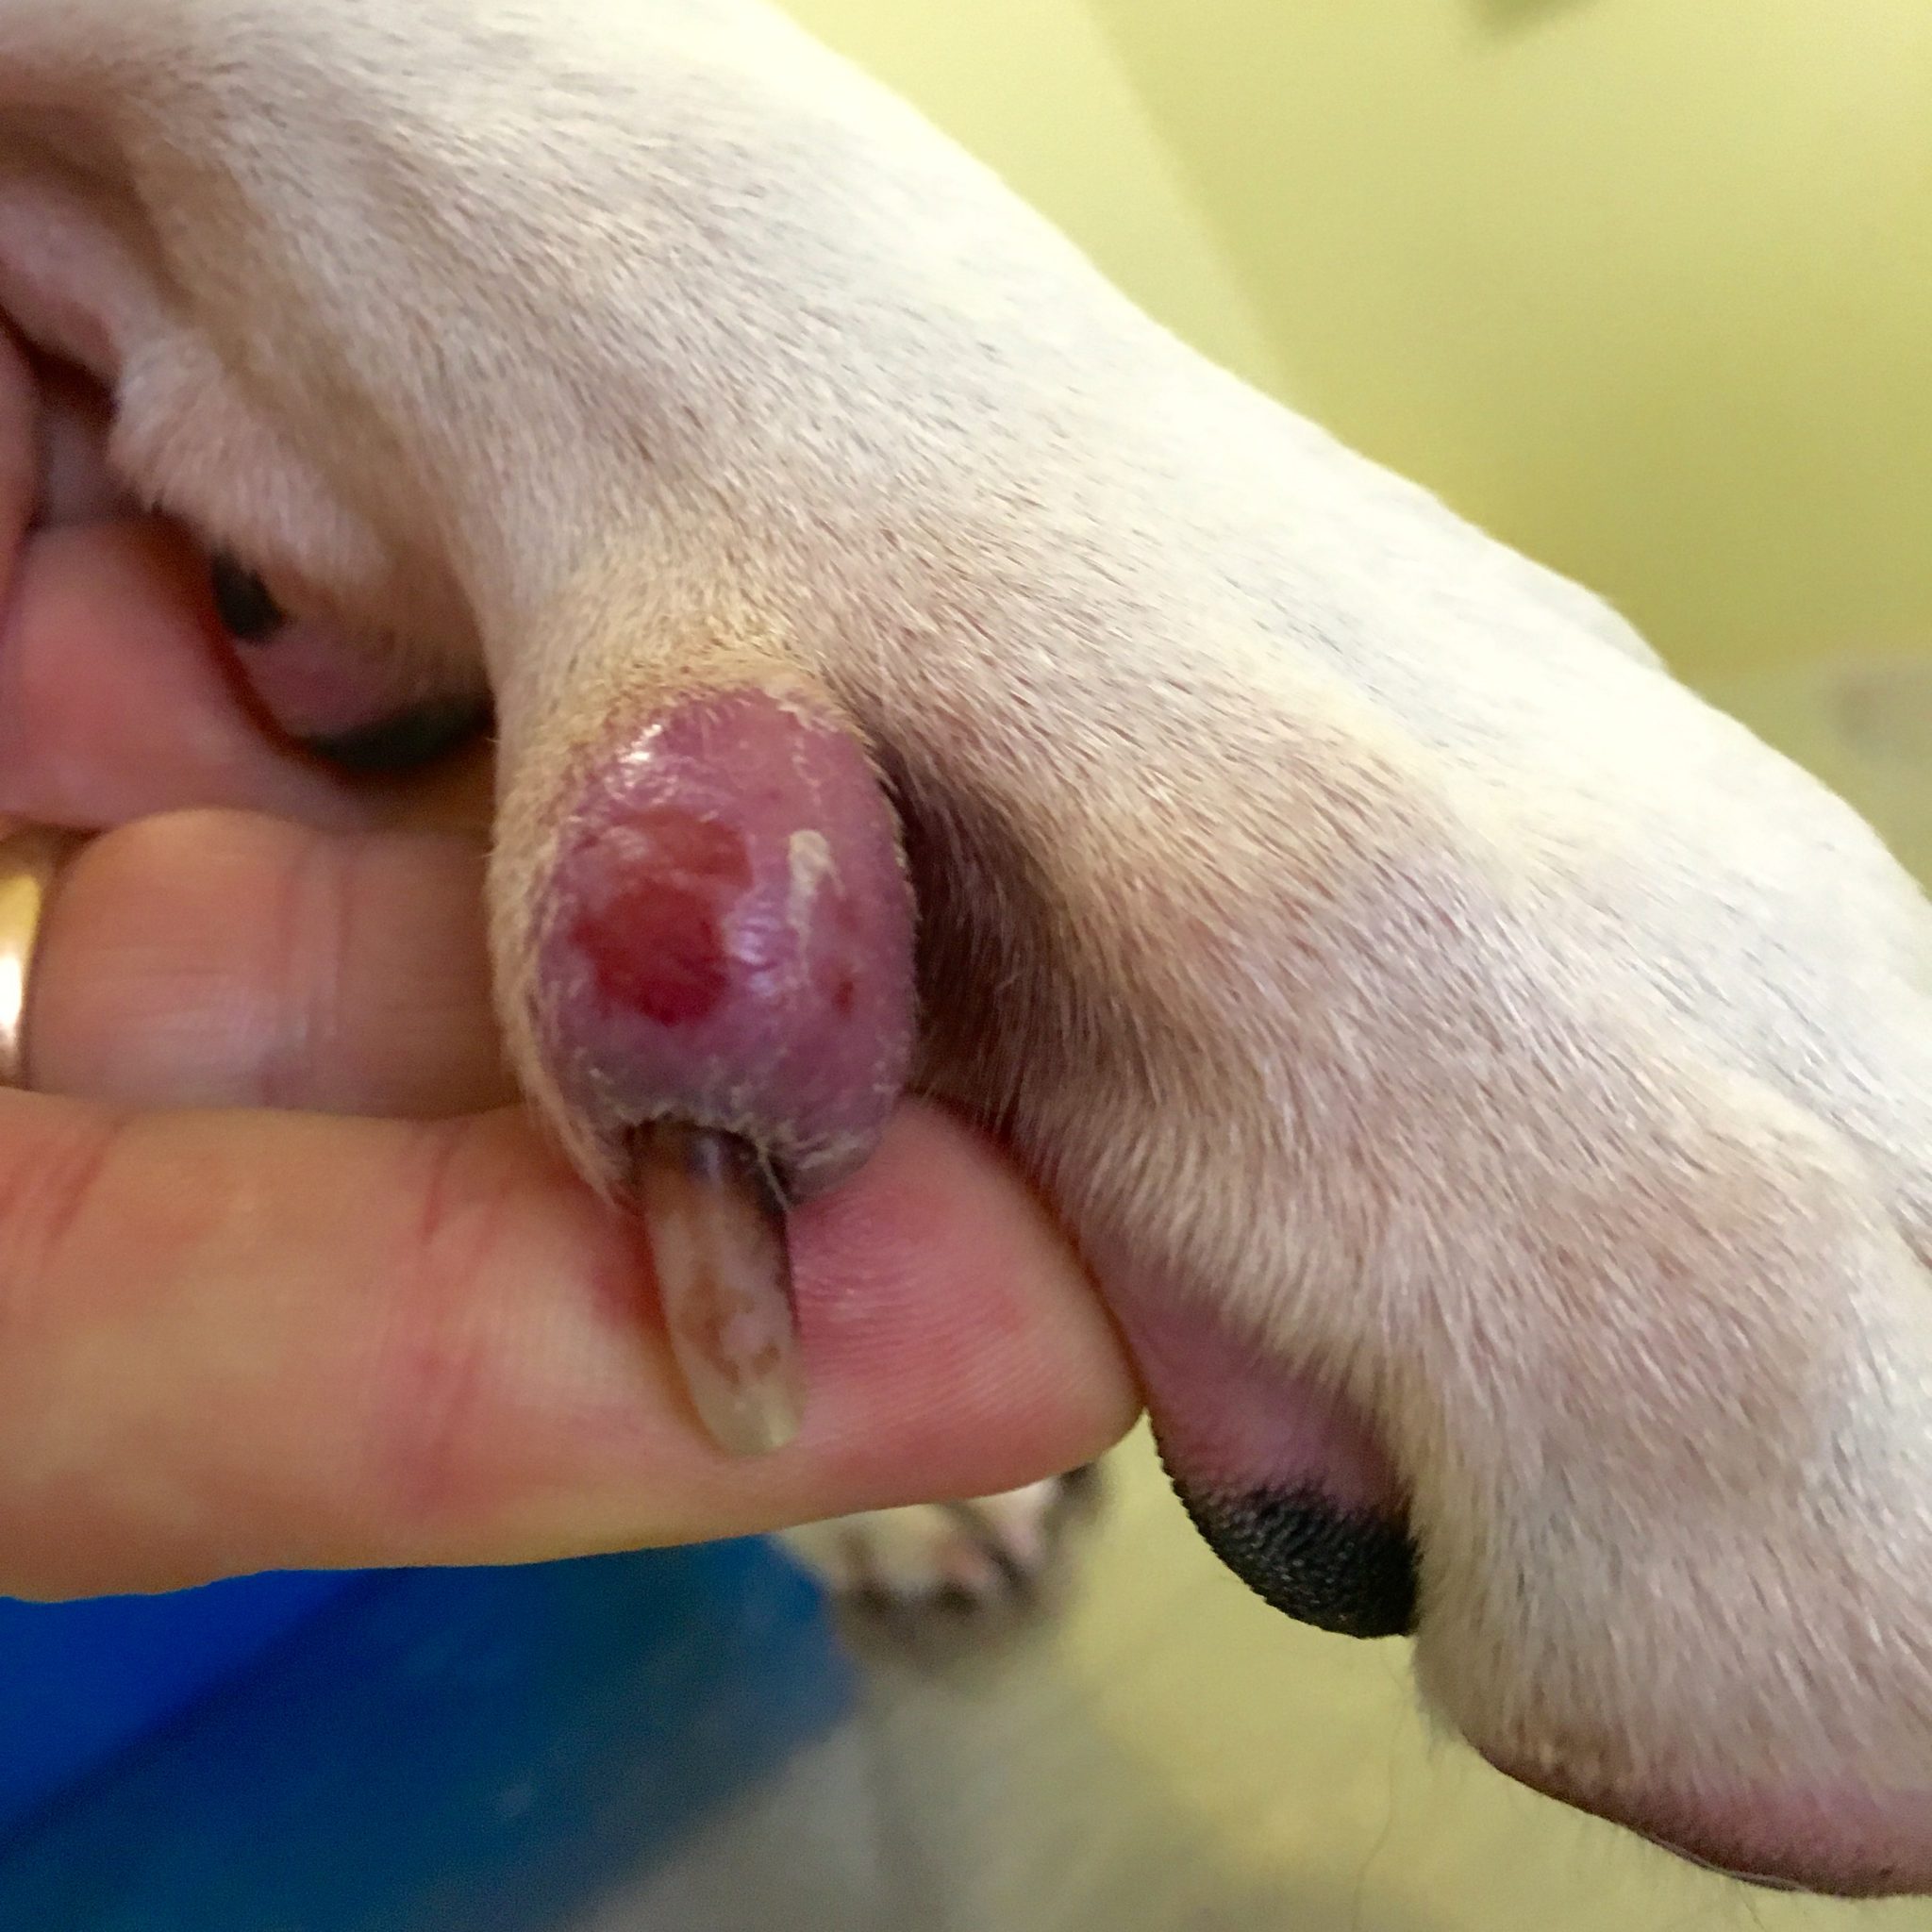 infected paw on dog